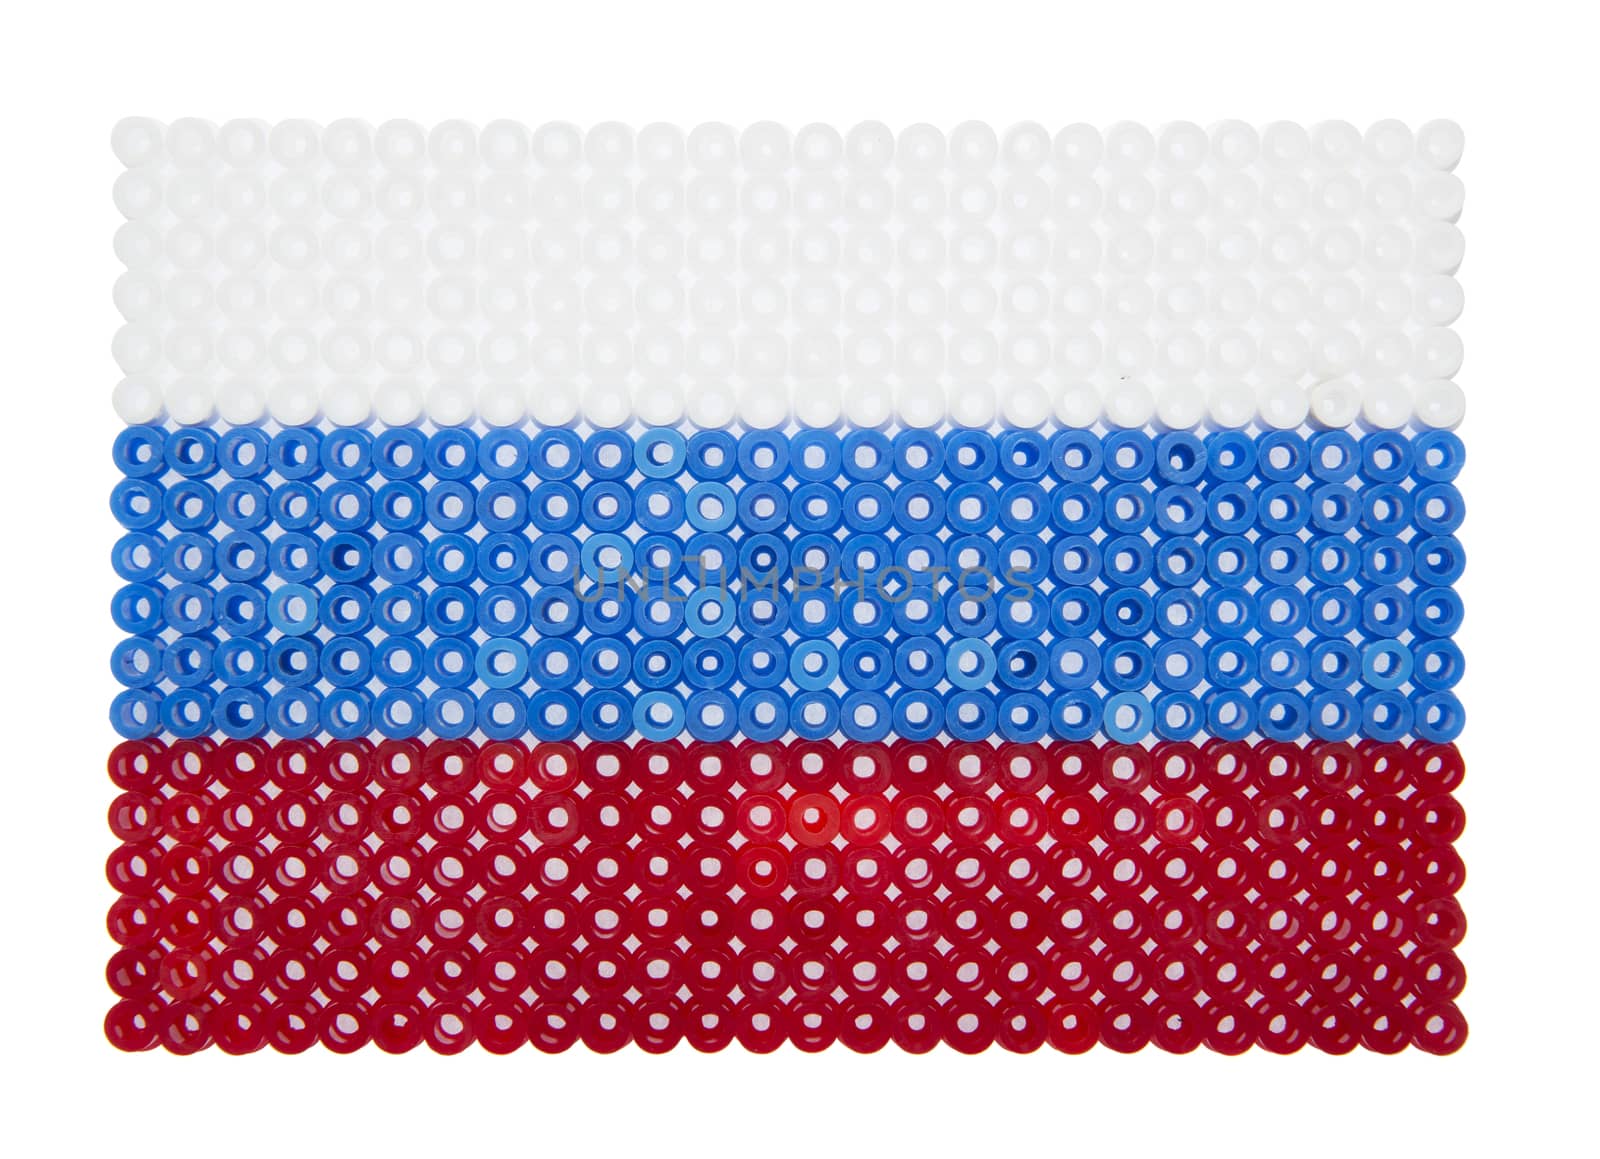 Russian Flag made of plastic pearls